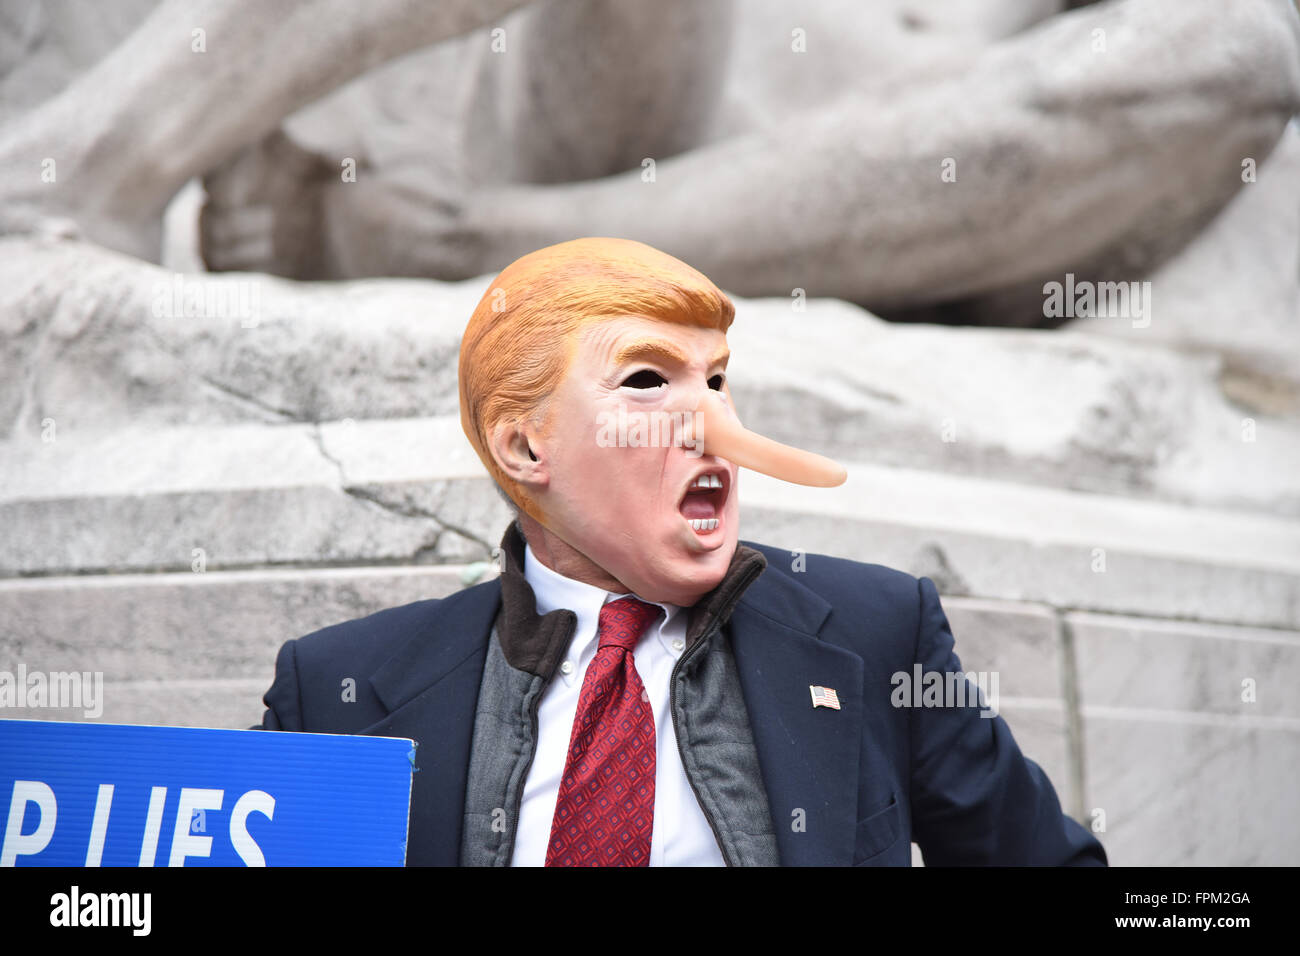 New York, USA, 19 March 2016: activist in long-nose Trump mask horses around in Columbus Circle during NYC rally against Republican front runner Donald Trump Credit:  Andrew Katz/Alamy Live News Stock Photo